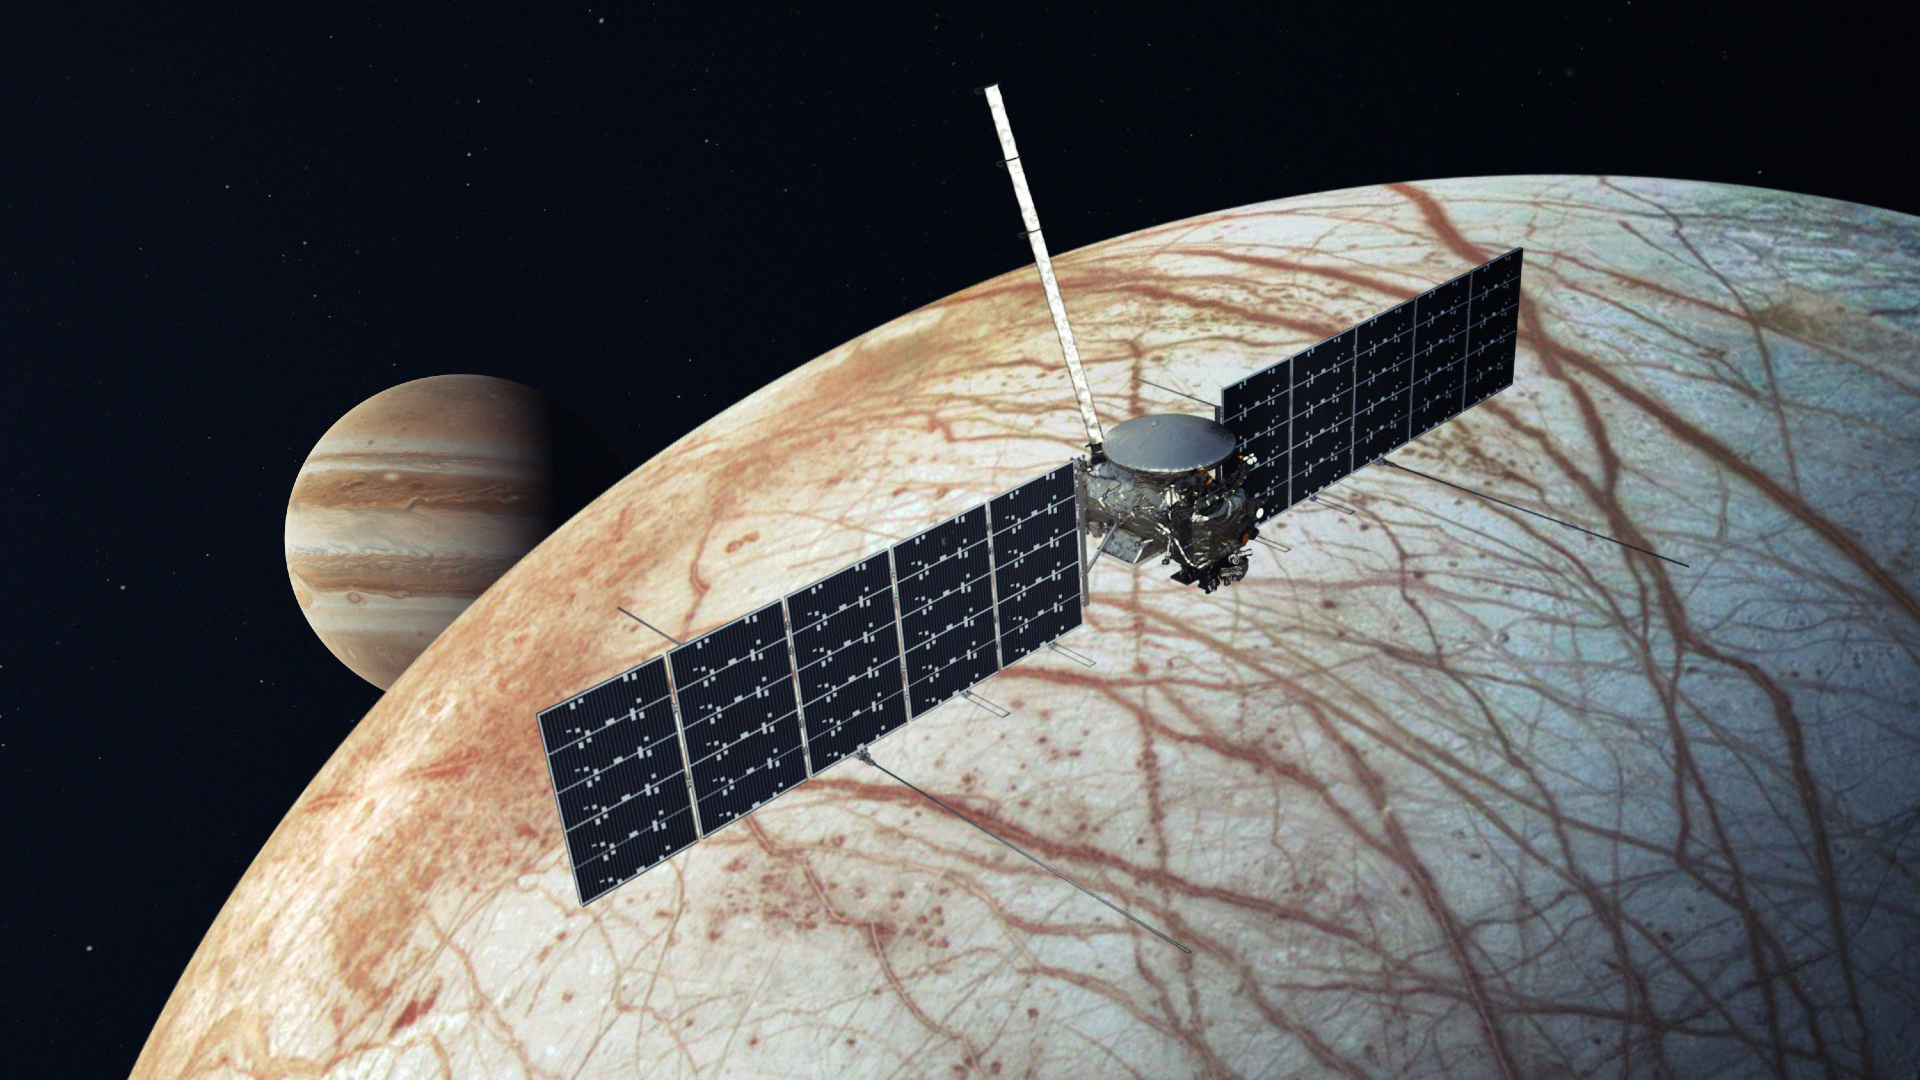 Artist's illustration of Europa Clipper spacecraft flying above Jupiter's icy moon Europa.